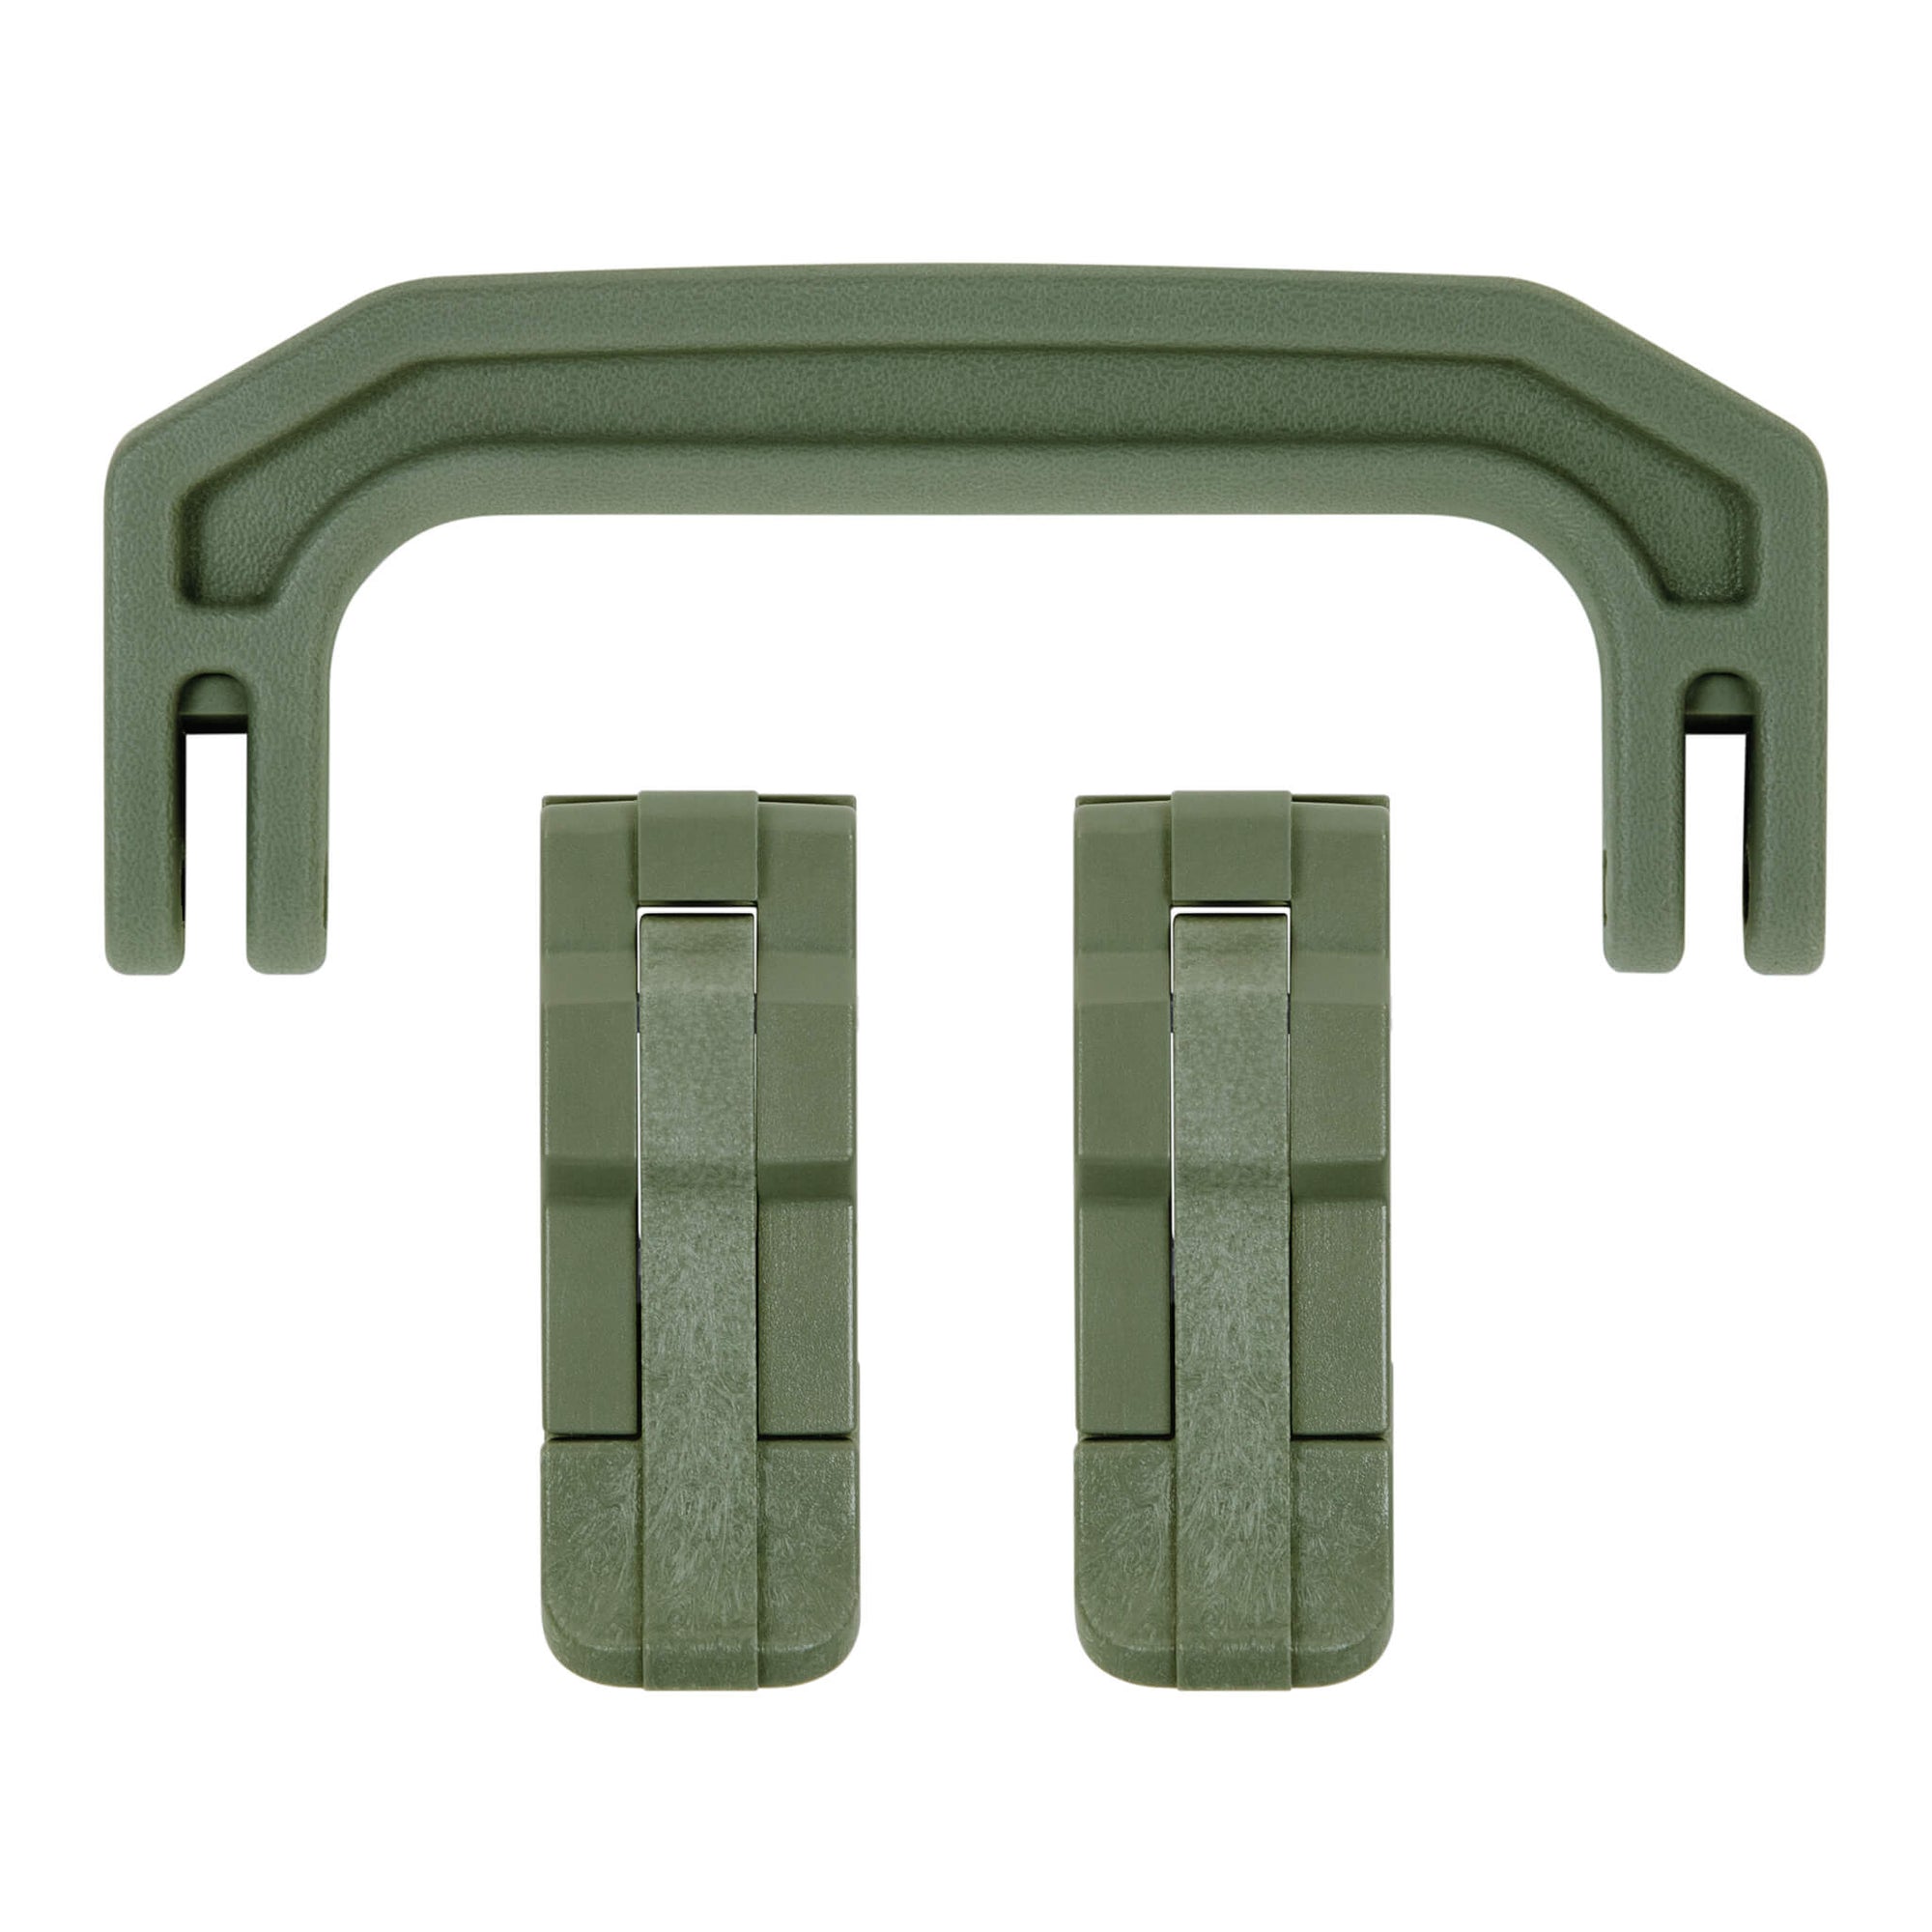 Pelican 1170 Replacement Handle & Latches, OD Green (Set of 1 Handle, 2 Latches) ColorCase 